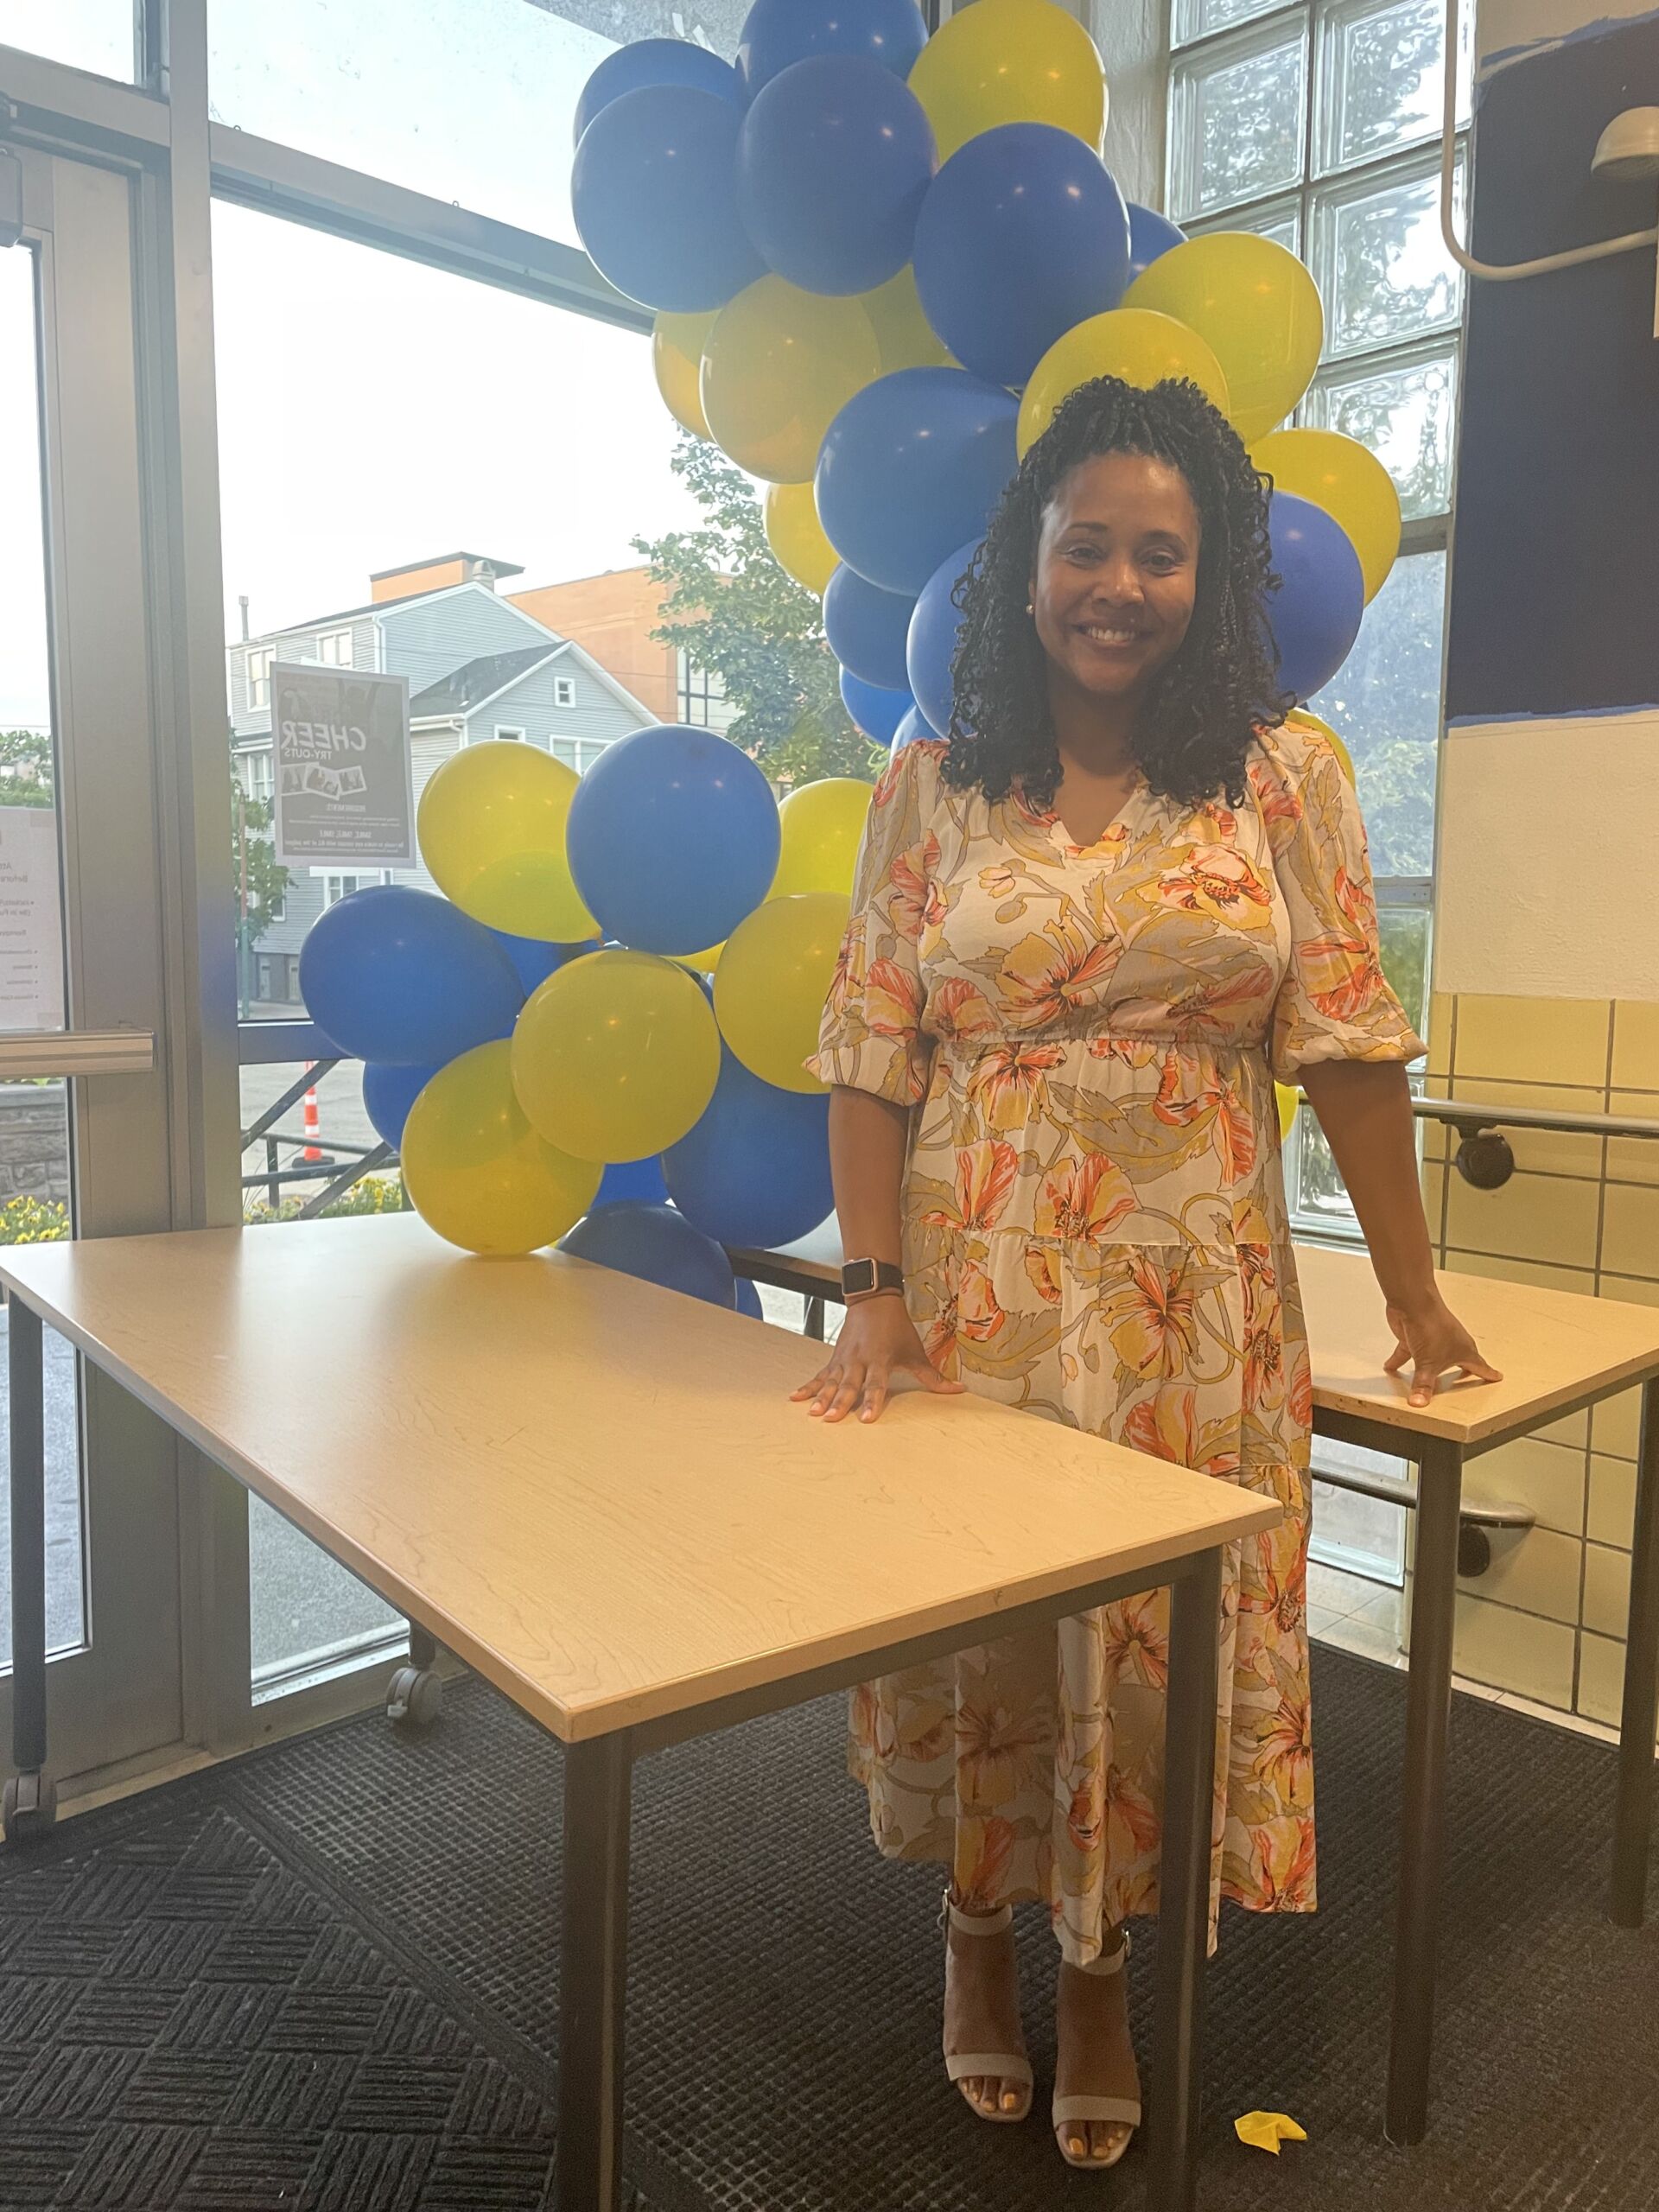 bennett standing smiling next to blue and yellow balloons